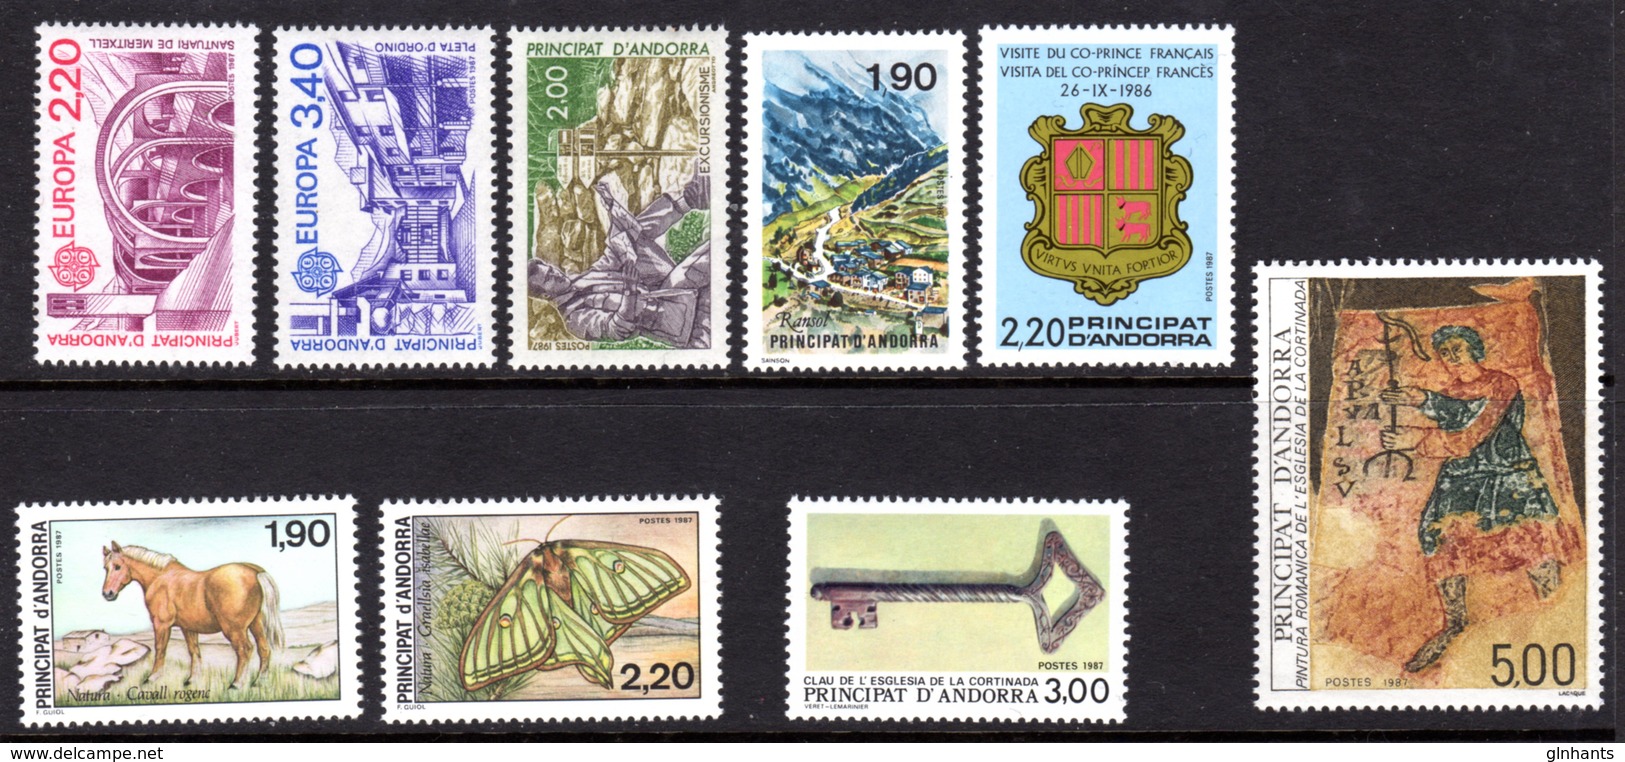 FRENCH ANDORRA - 1987 COMPLETE YEAR SET FINE MNH ** SG F389 - F397 - Collections